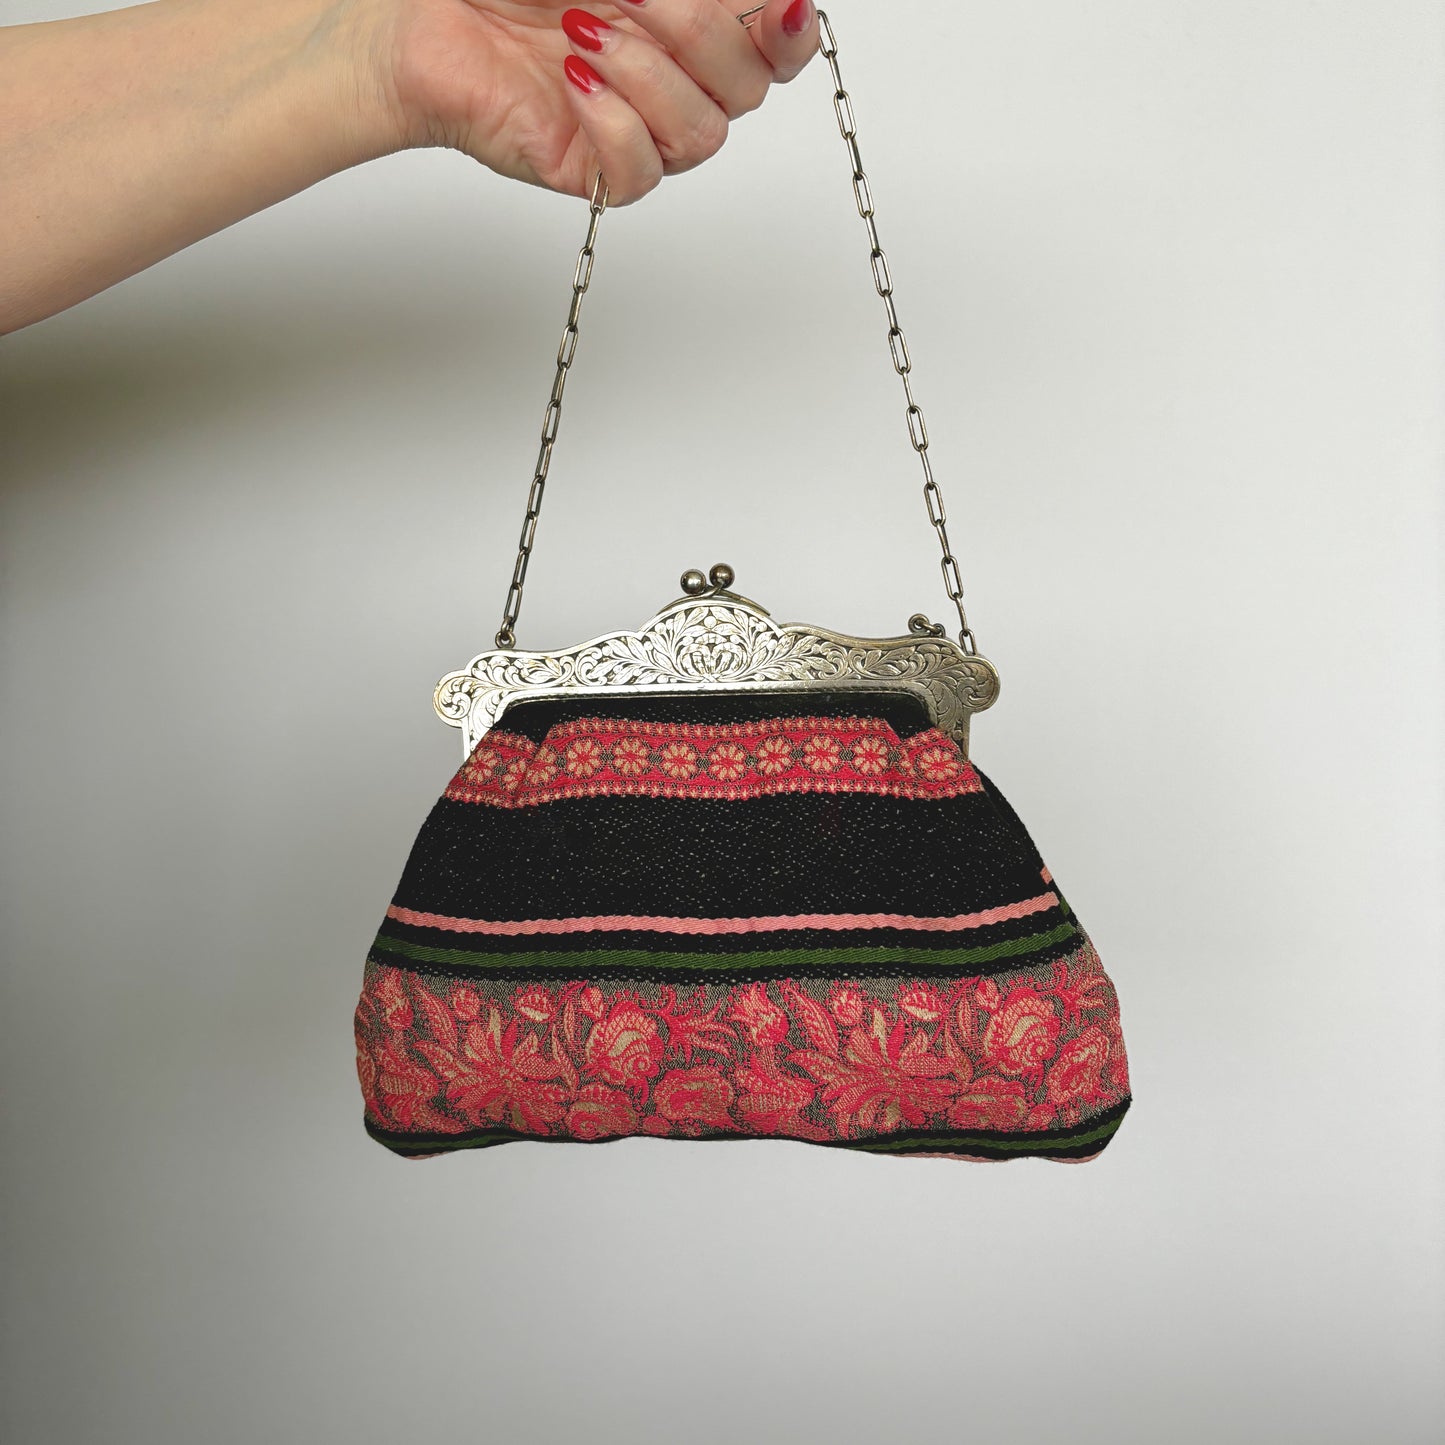 1920s/30s Pink and Green Embroidered Alpacca Purse